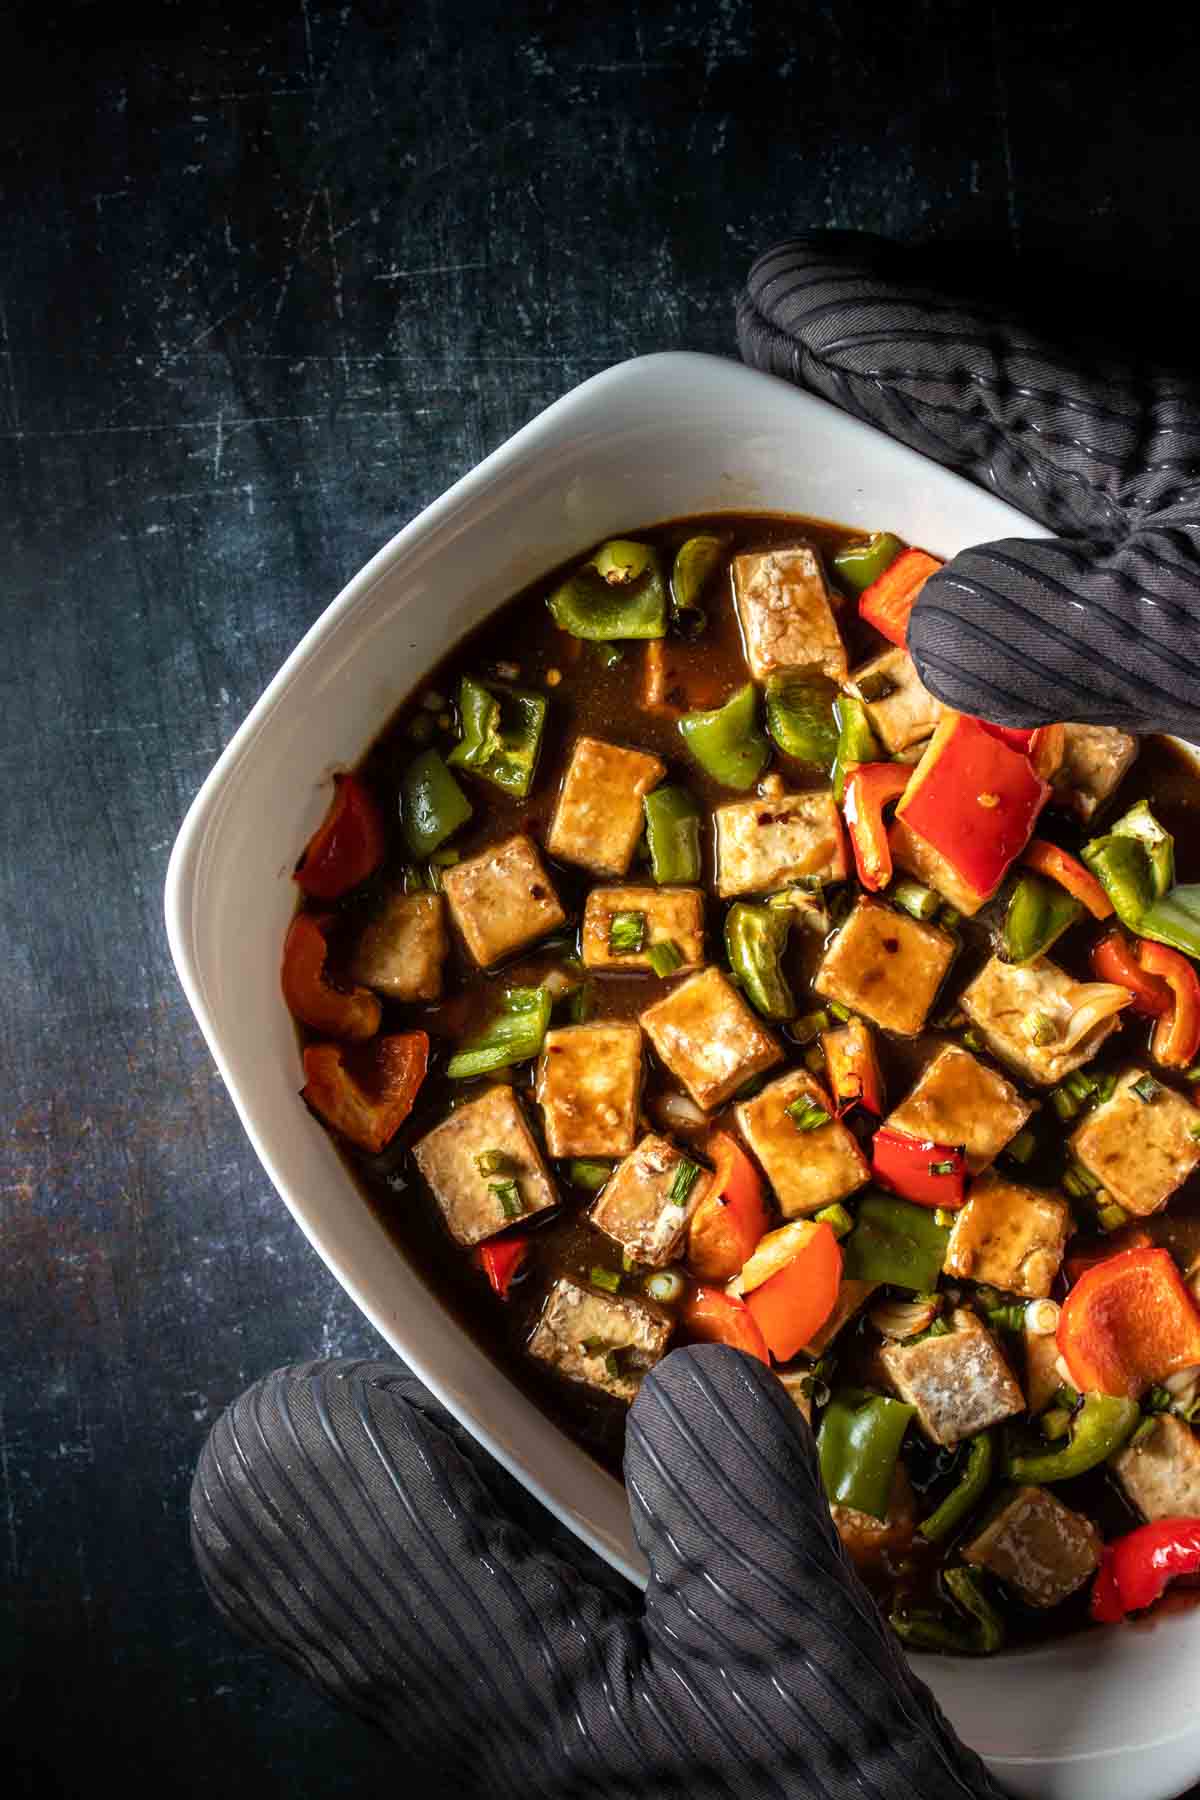 Grey oven mitts holding a white baking dish with baked tofu and red and green bell peppers and a brown sauce over them.